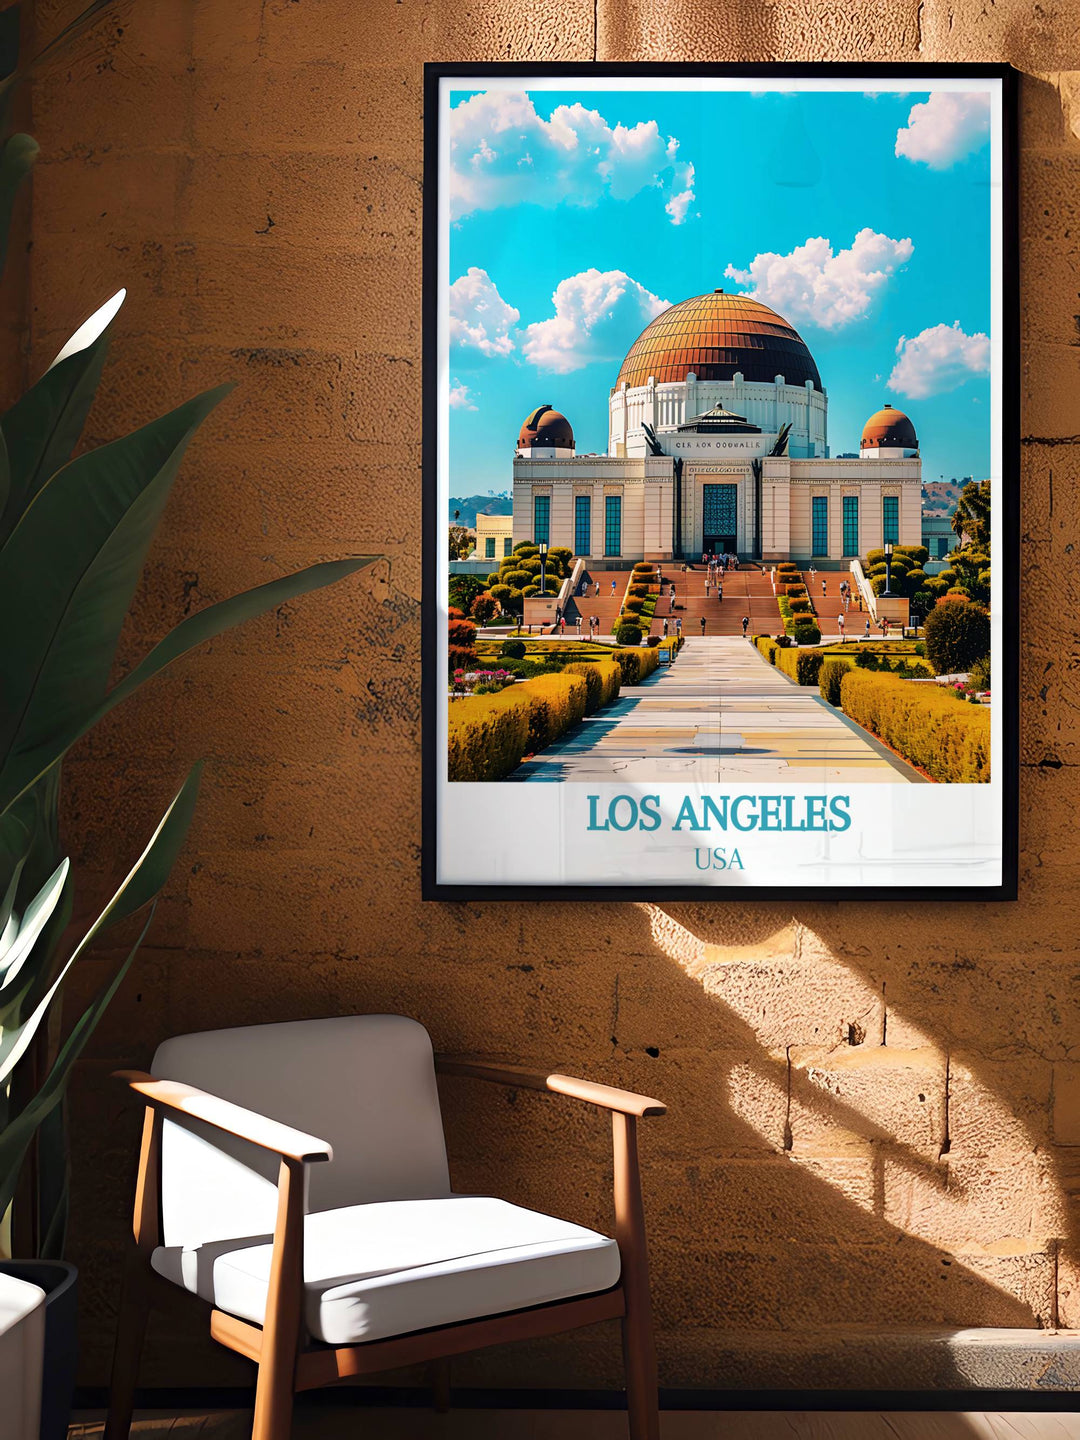 Los Angeles skyline art print, perfect for those who admire cityscapes and urban aesthetics.